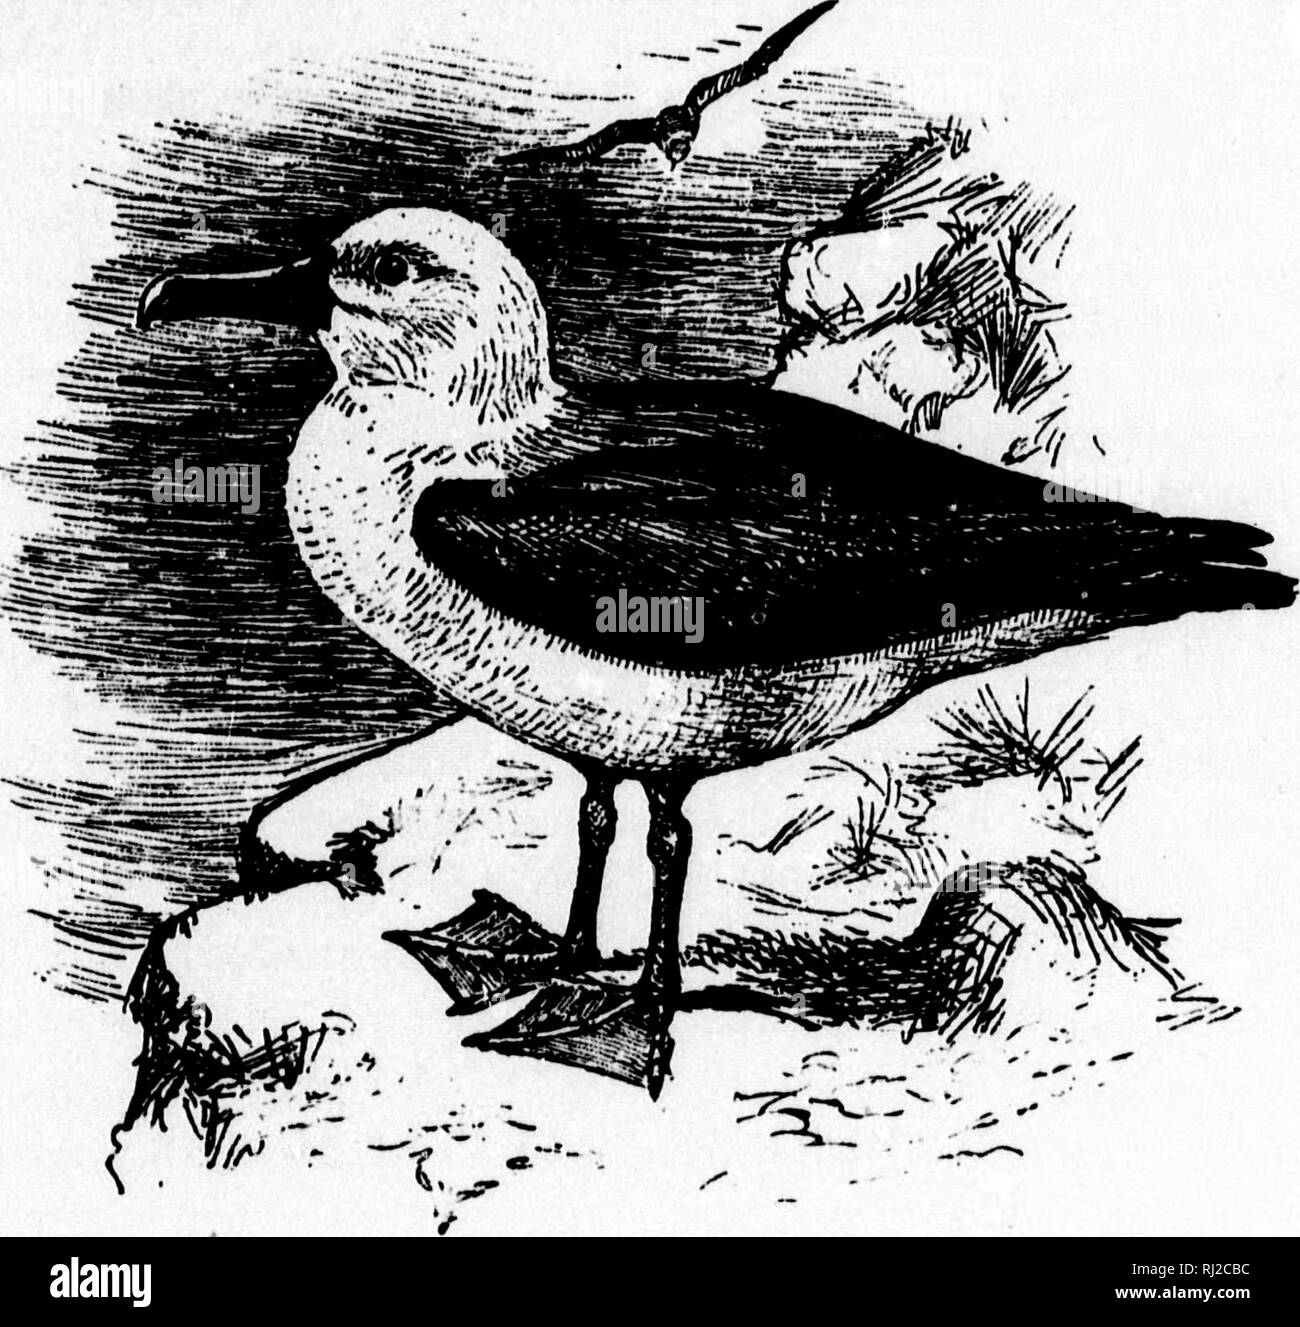 . A popular handbook of the ornithology of eastern North America [microform]. Ornithology; Ornithology; Game and game-birds; Game and game-birds; Water-birds; Water-birds; Ornithologie; Ornithologie; Gibier; Gibier; Oiseaux aquatiques; Oiseaux aquatiques. YELLOW-NOSED ALBATROSS. Thalassogeron culminatus. Char. Mantle dark bluish slate, shading to brownish on wings and head; rump white; tail grayish; under parts white. Length about 36 inches. IVest. In an exposed situation on an ocean island; a bulky structure of coarse herbage and mud lined with fine grass and feathers. As new material is adde Stock Photo